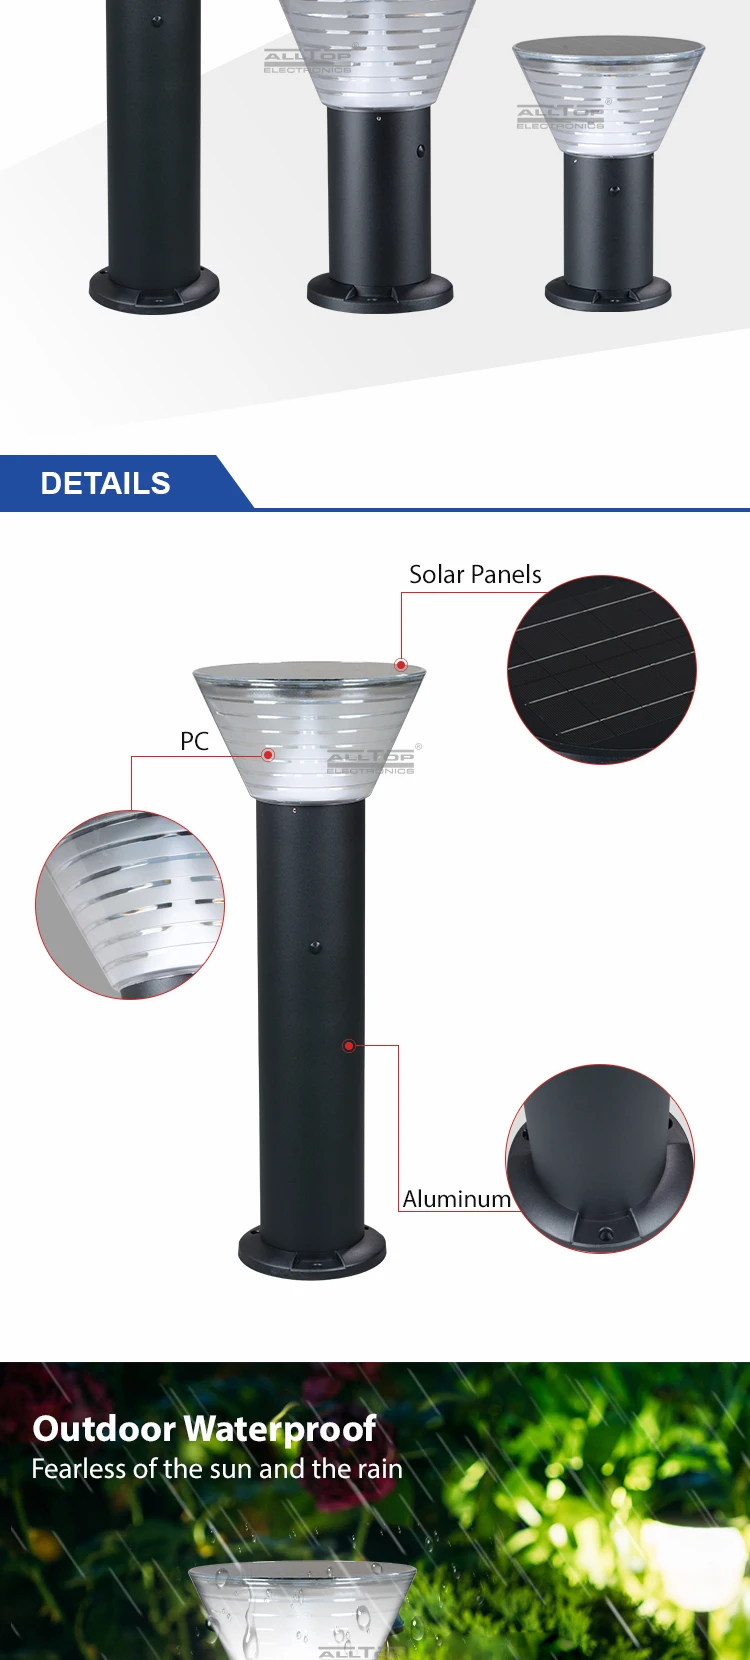 ALLTOP New product integrated garden IP65 outdoor 5w all in one led solar garden light price